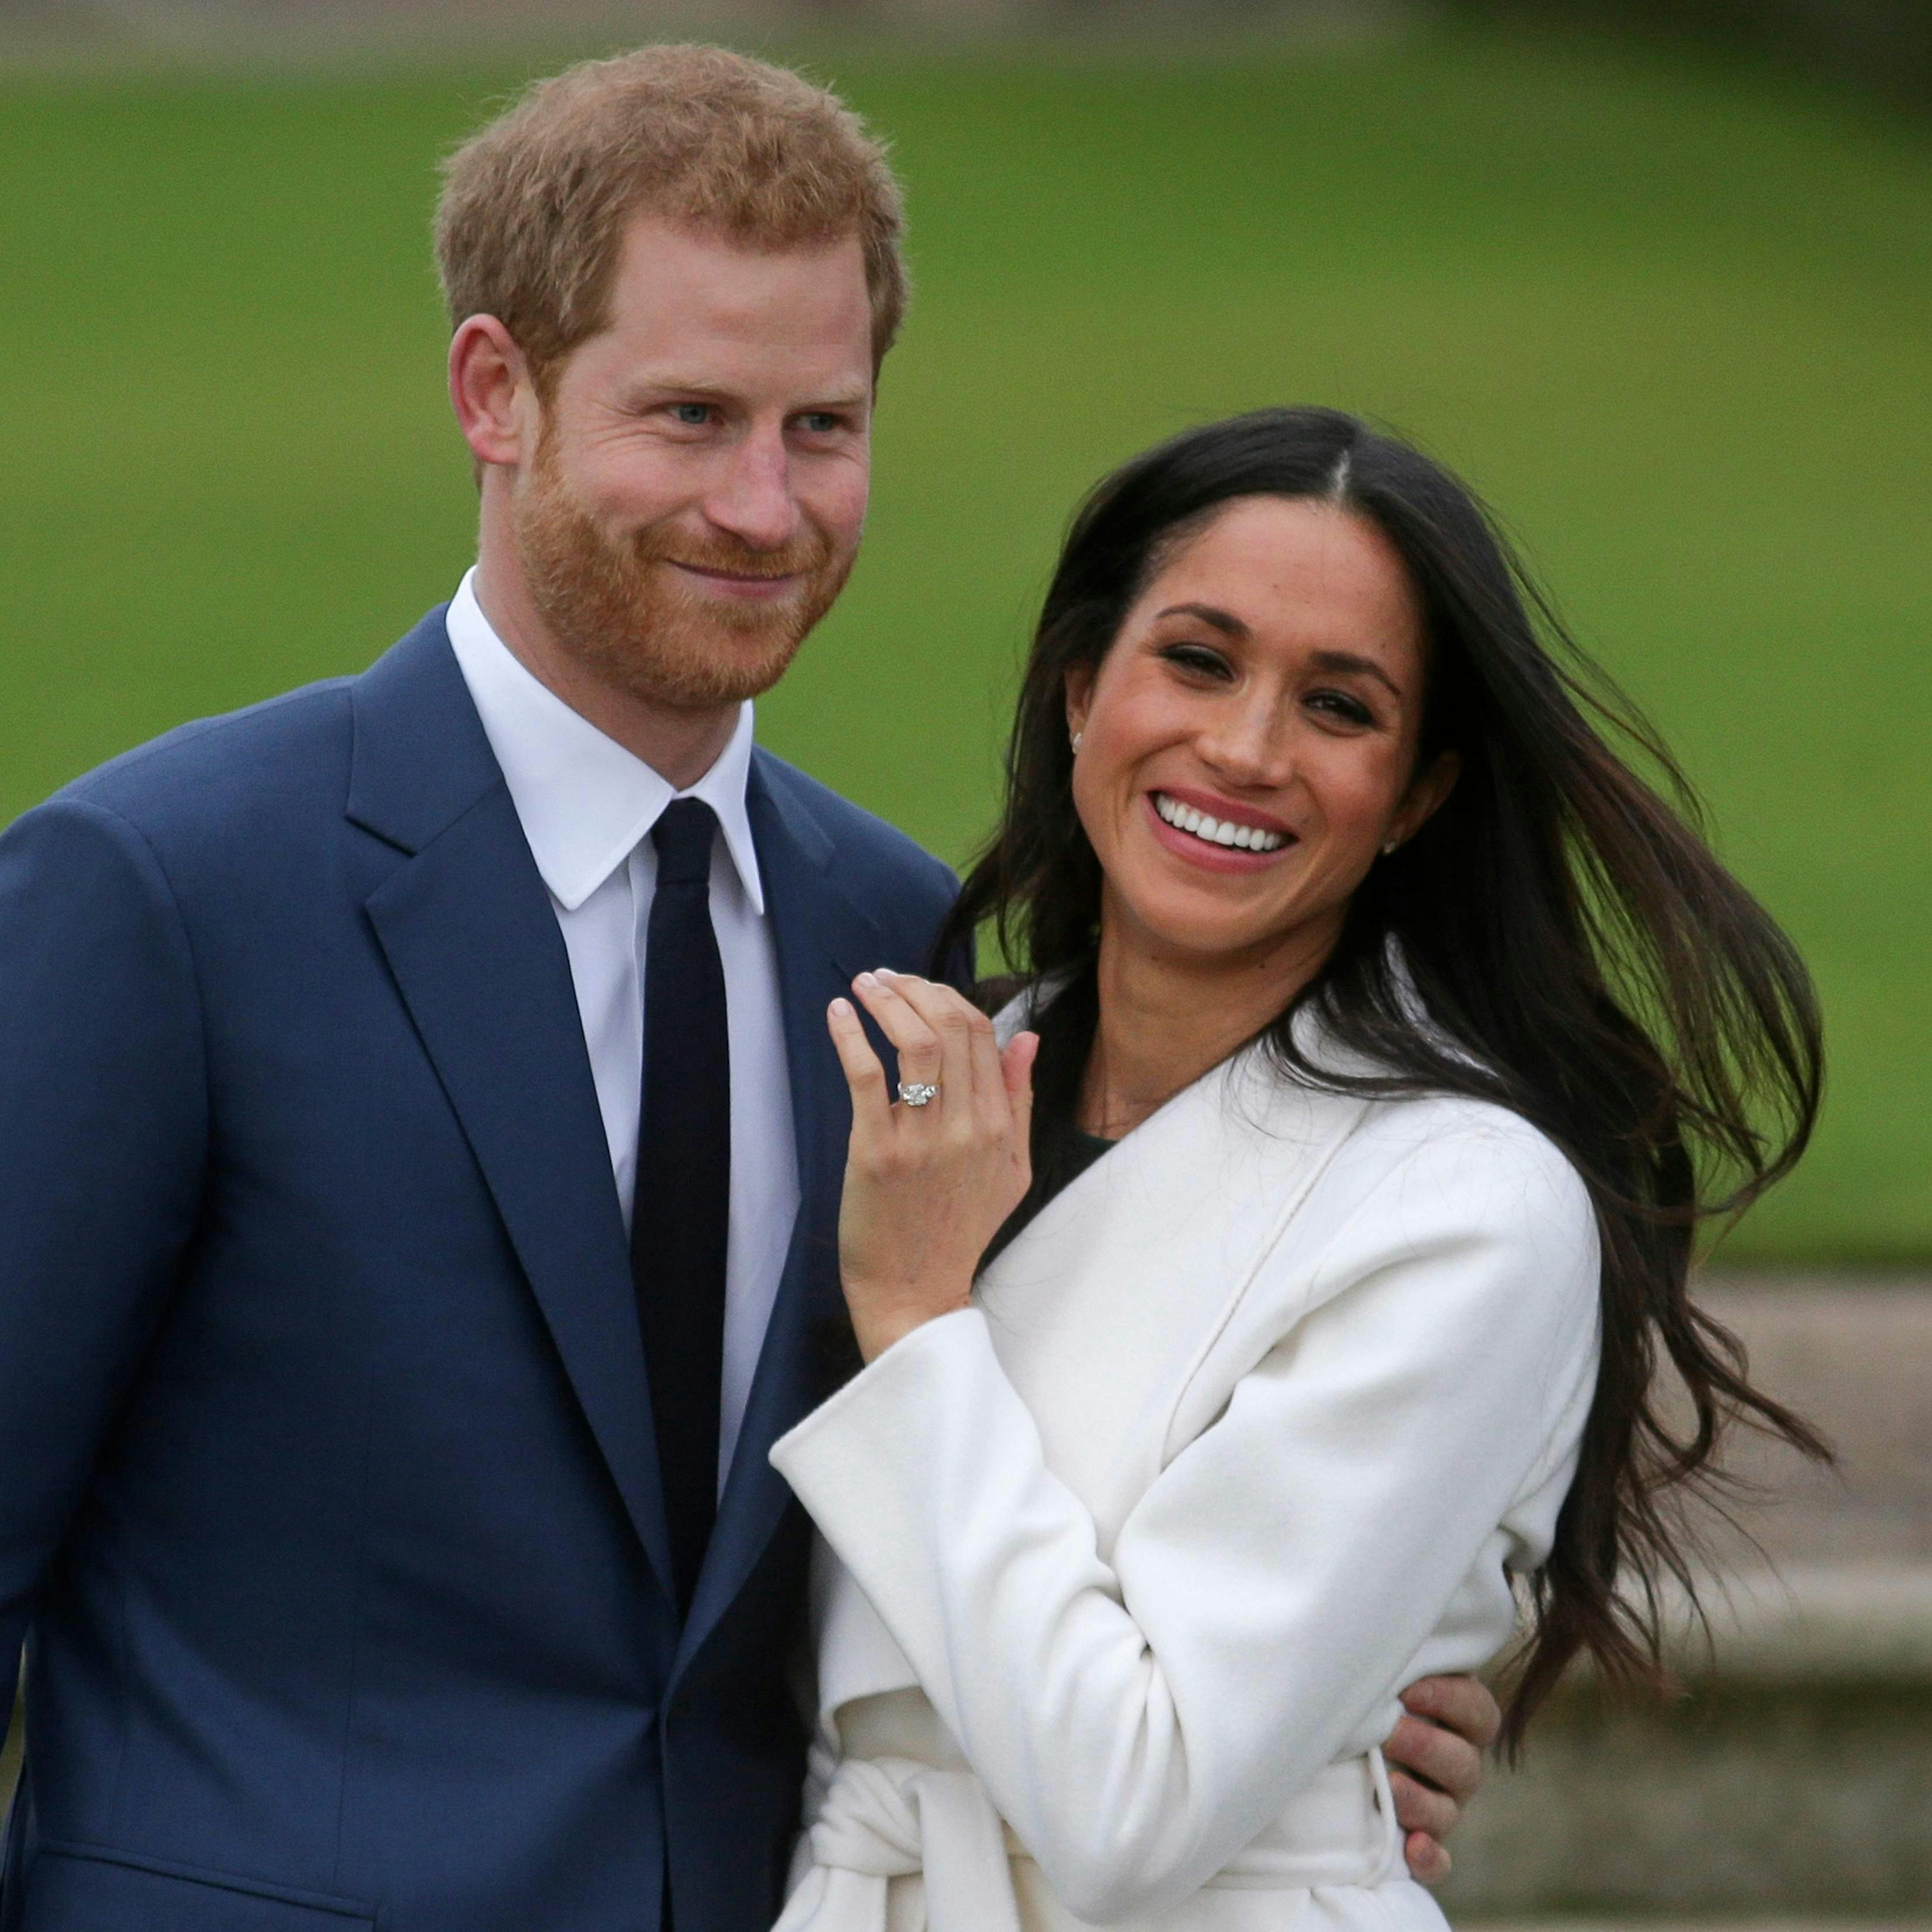 Prince Harry stands with his fiancée US actress Meghan Markle